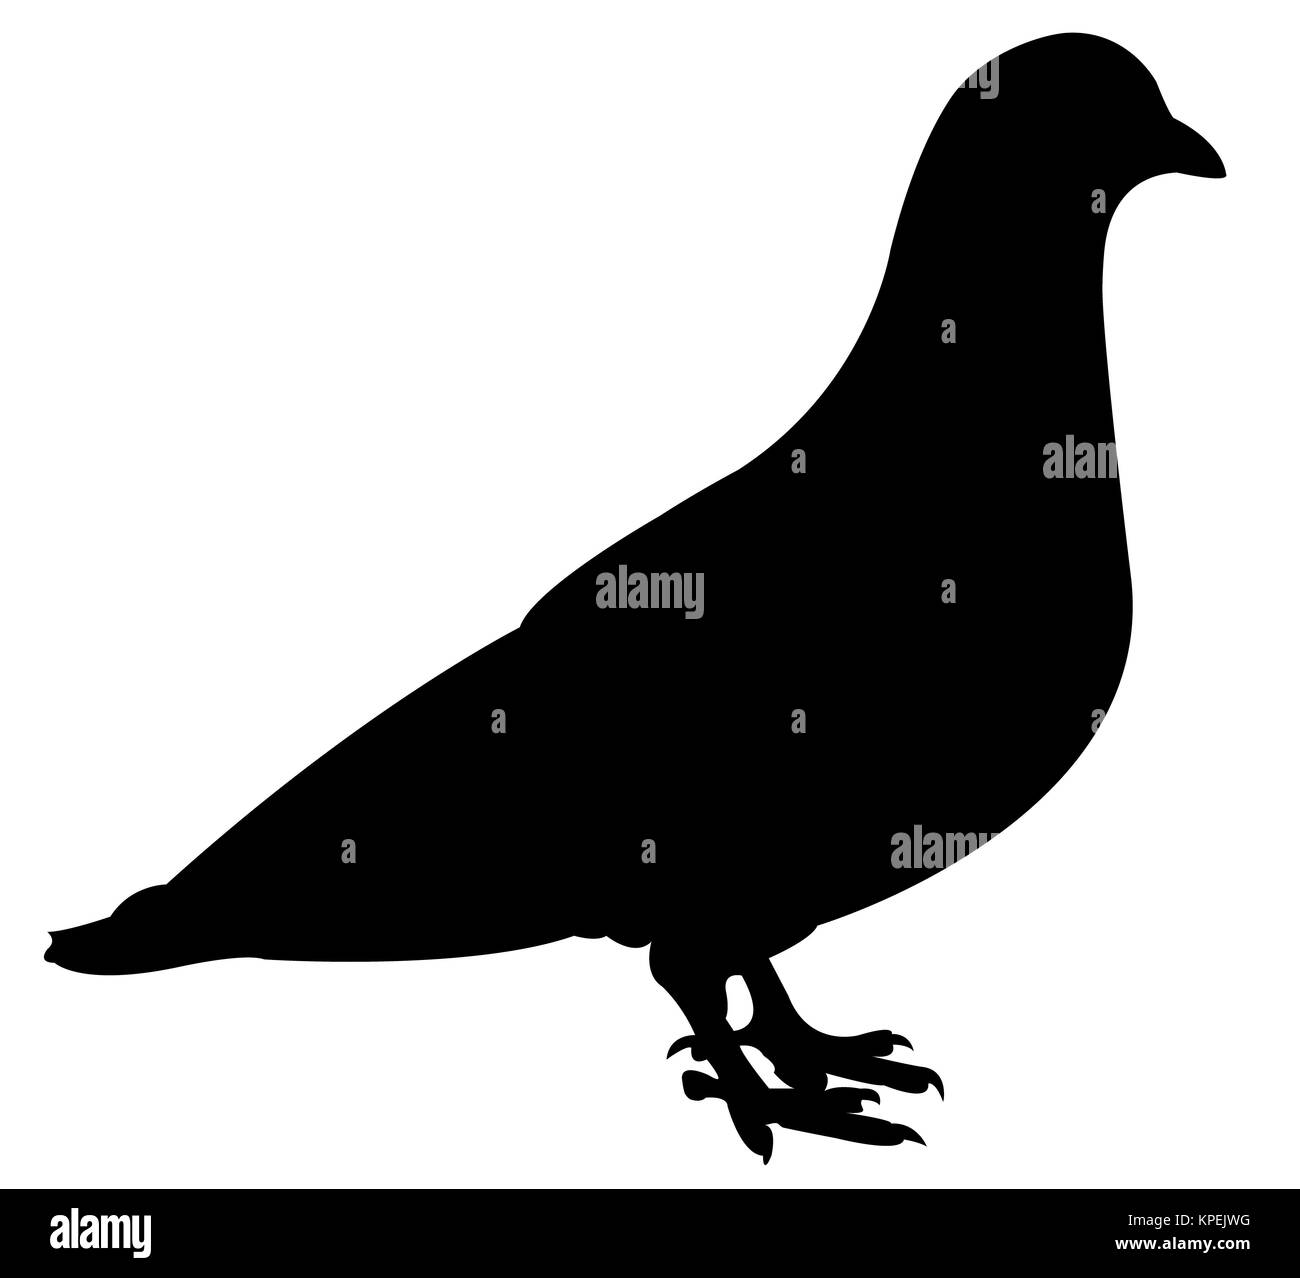 a pigeon silhouette Stock Photo